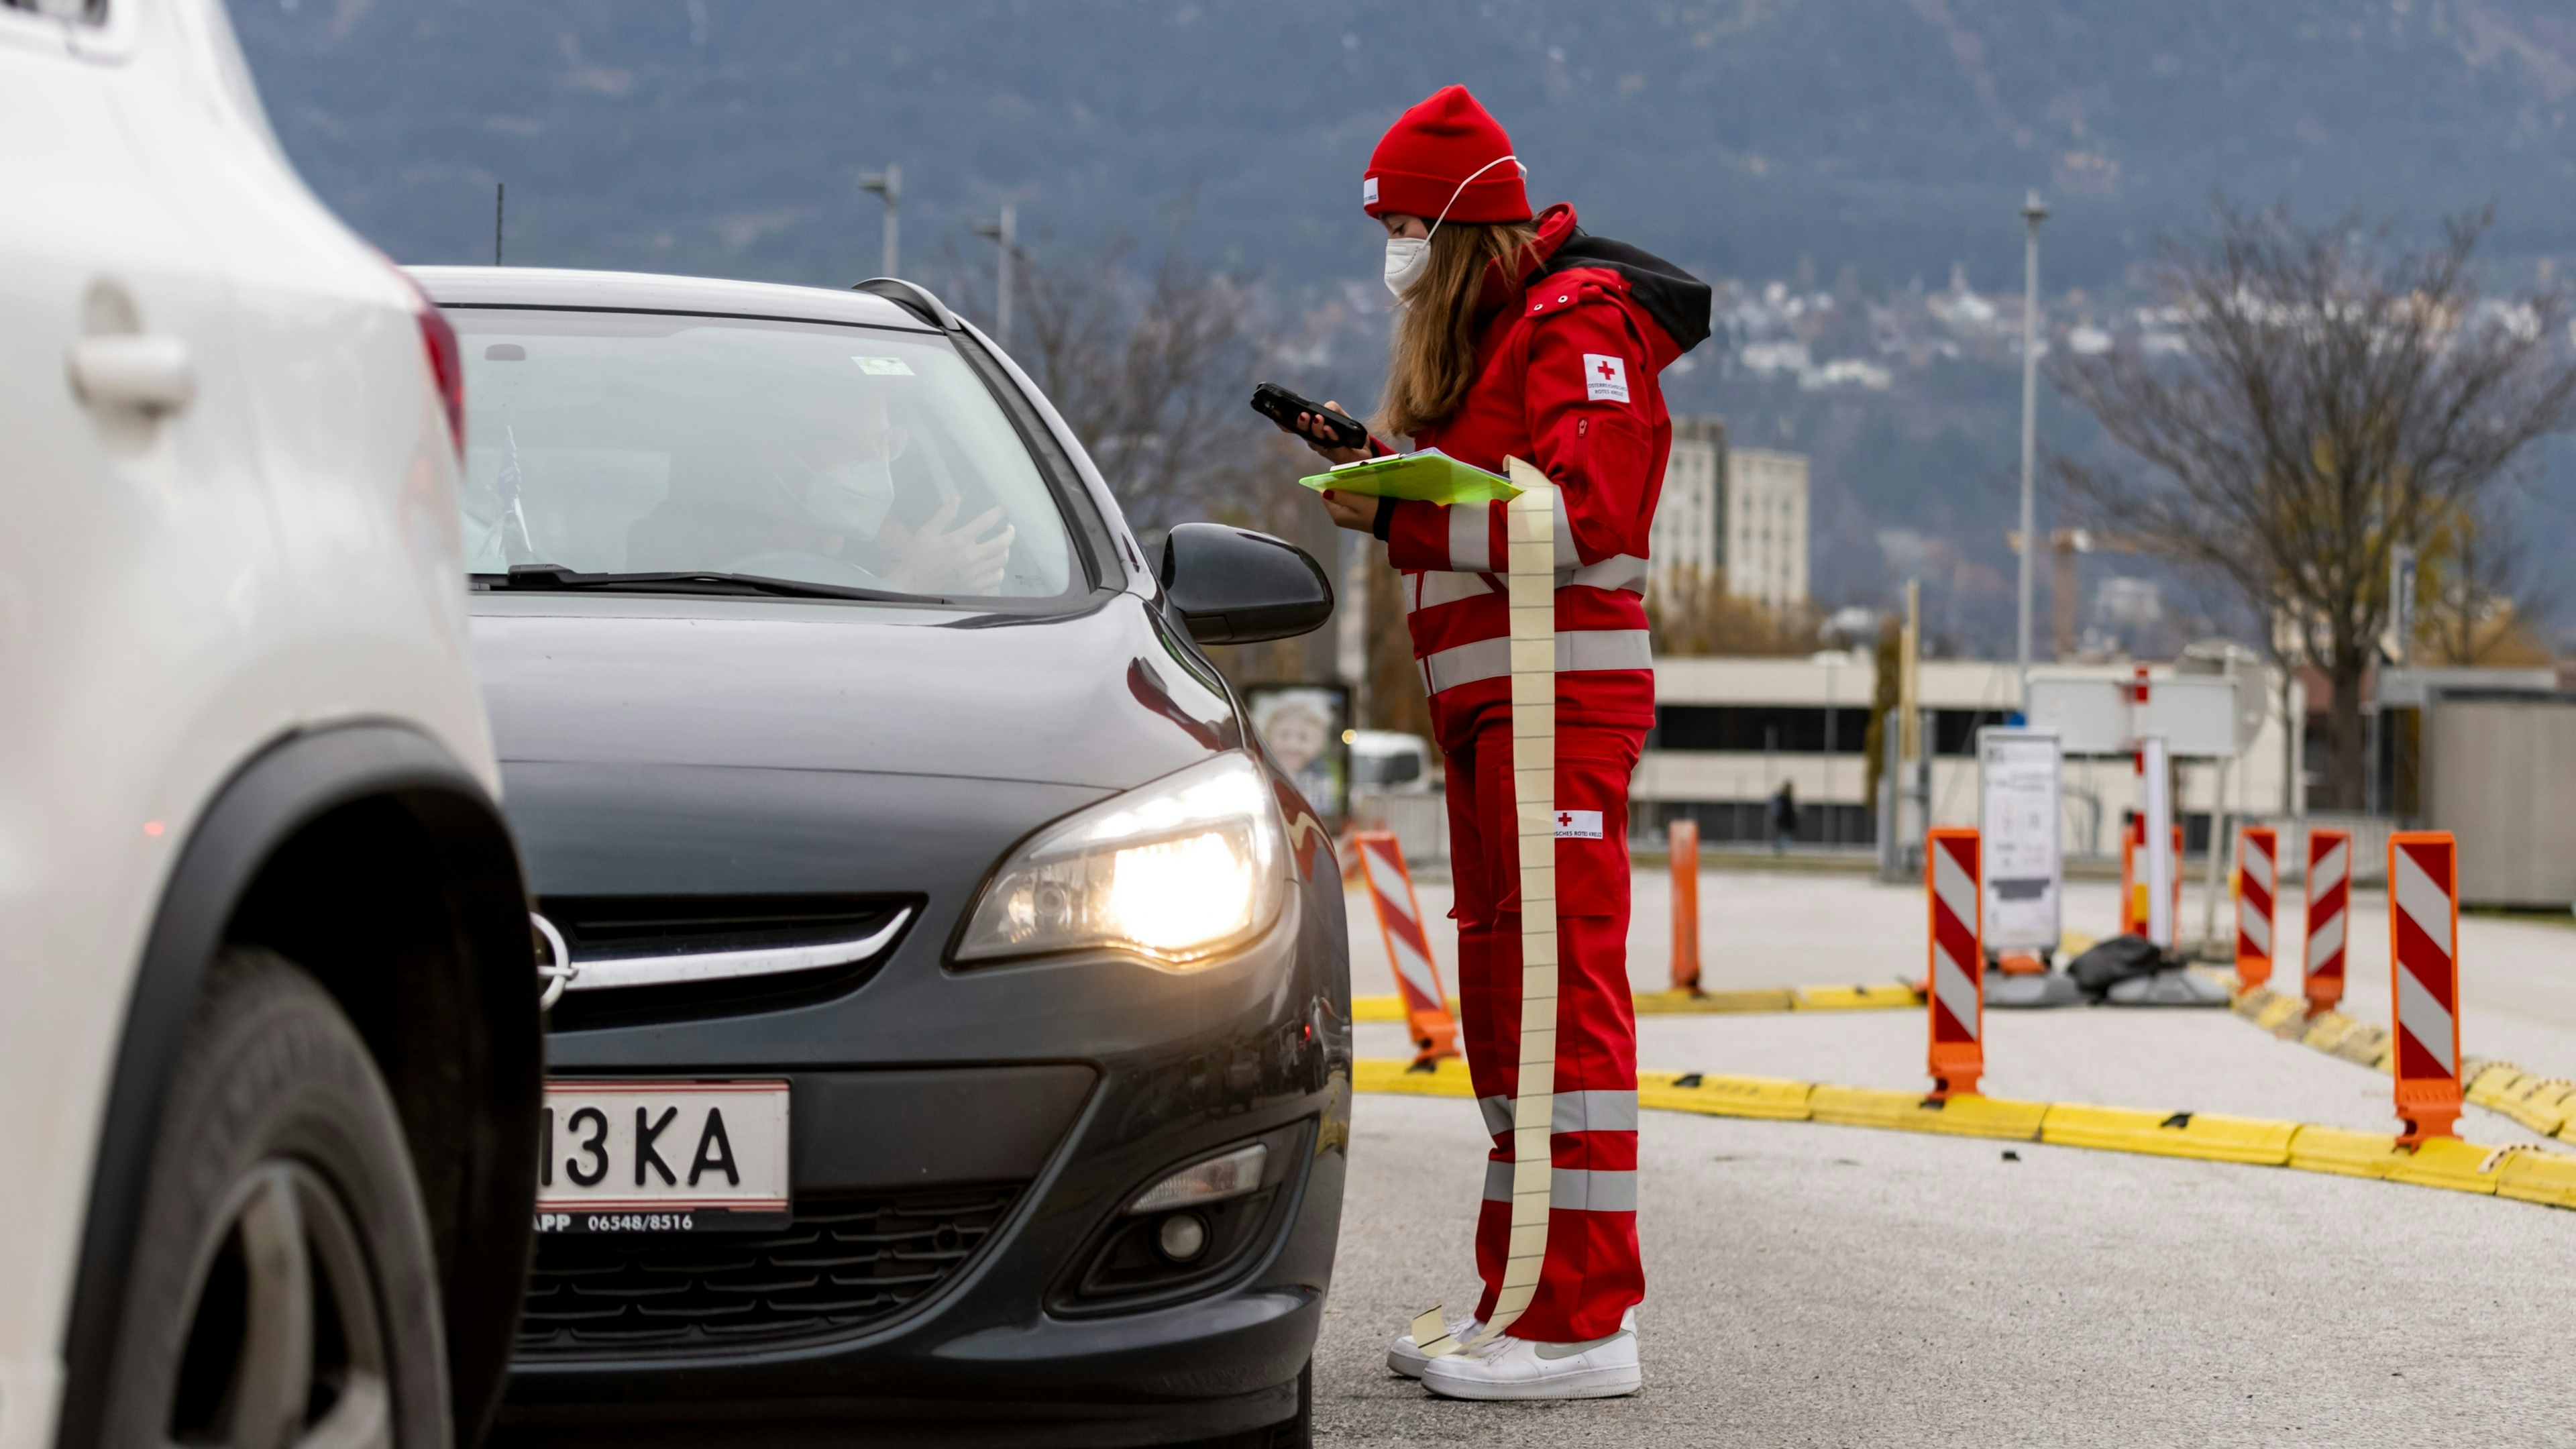 An employee of the Red Cross checks the registrations for the PCR test at a Covid-19 testing station on November 08, 2021 in Innsbruck, Austria